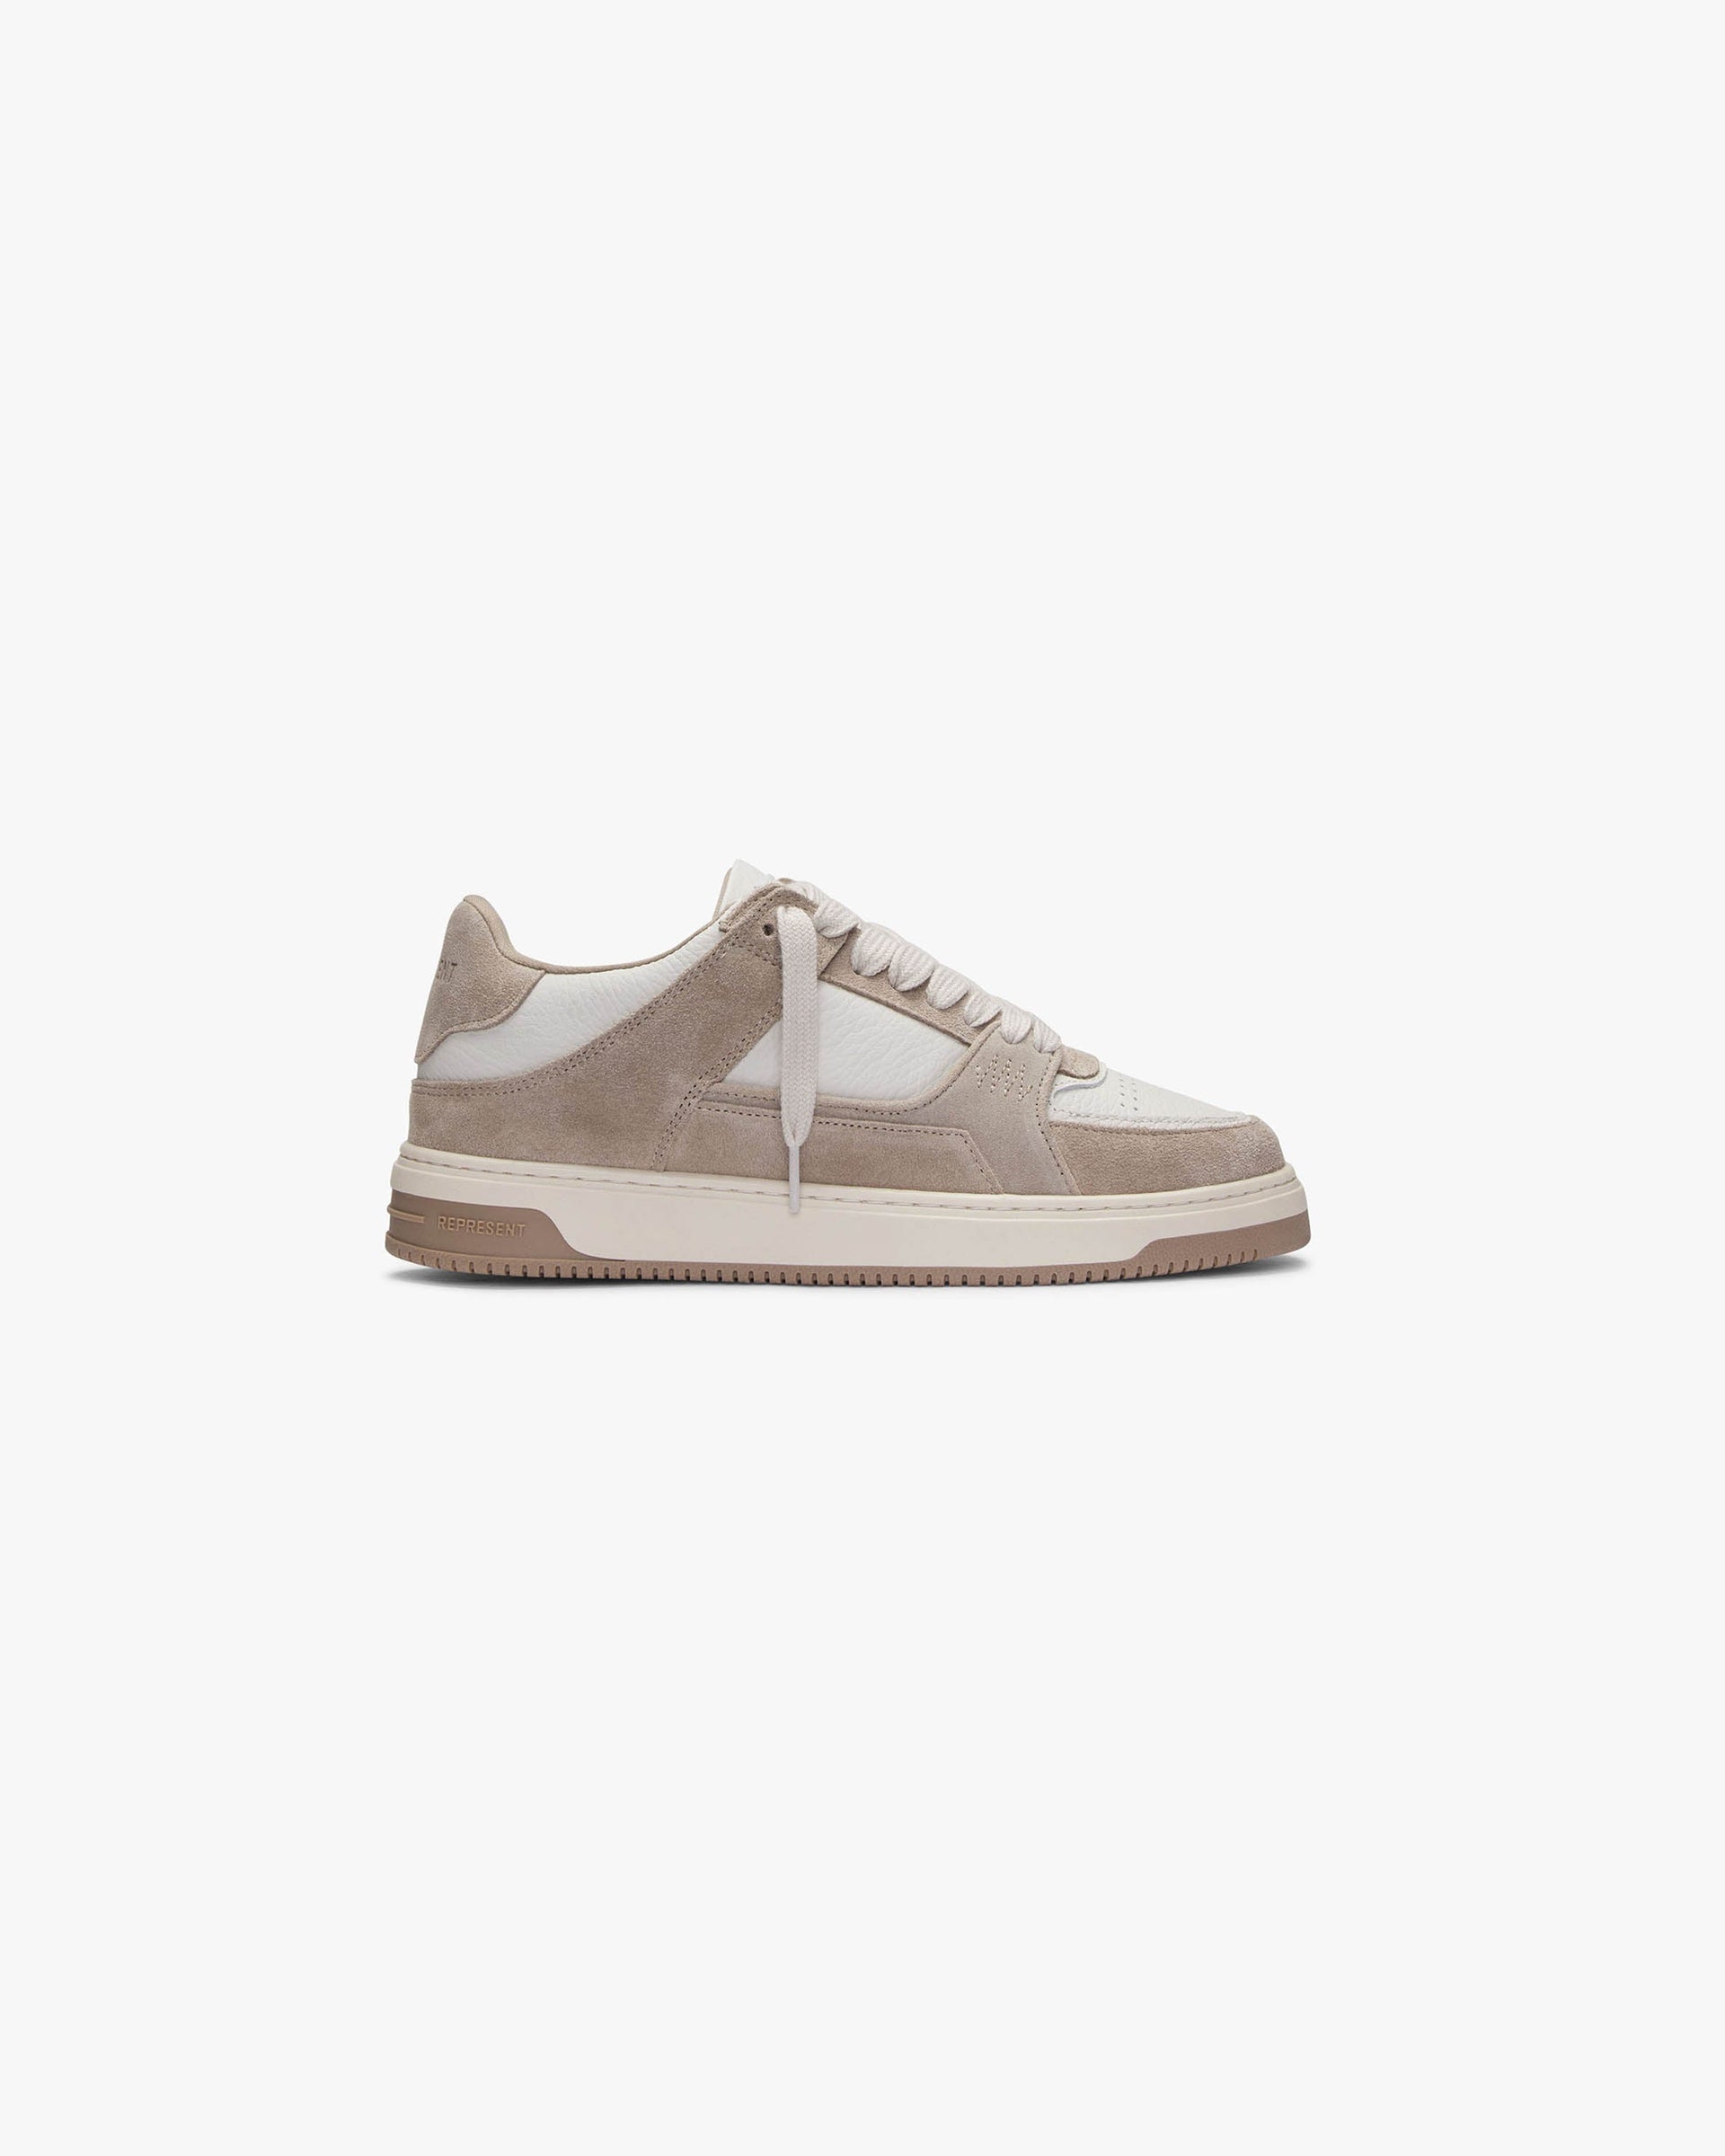 Apex | Taupe White Footwear SS22 | Represent Clo